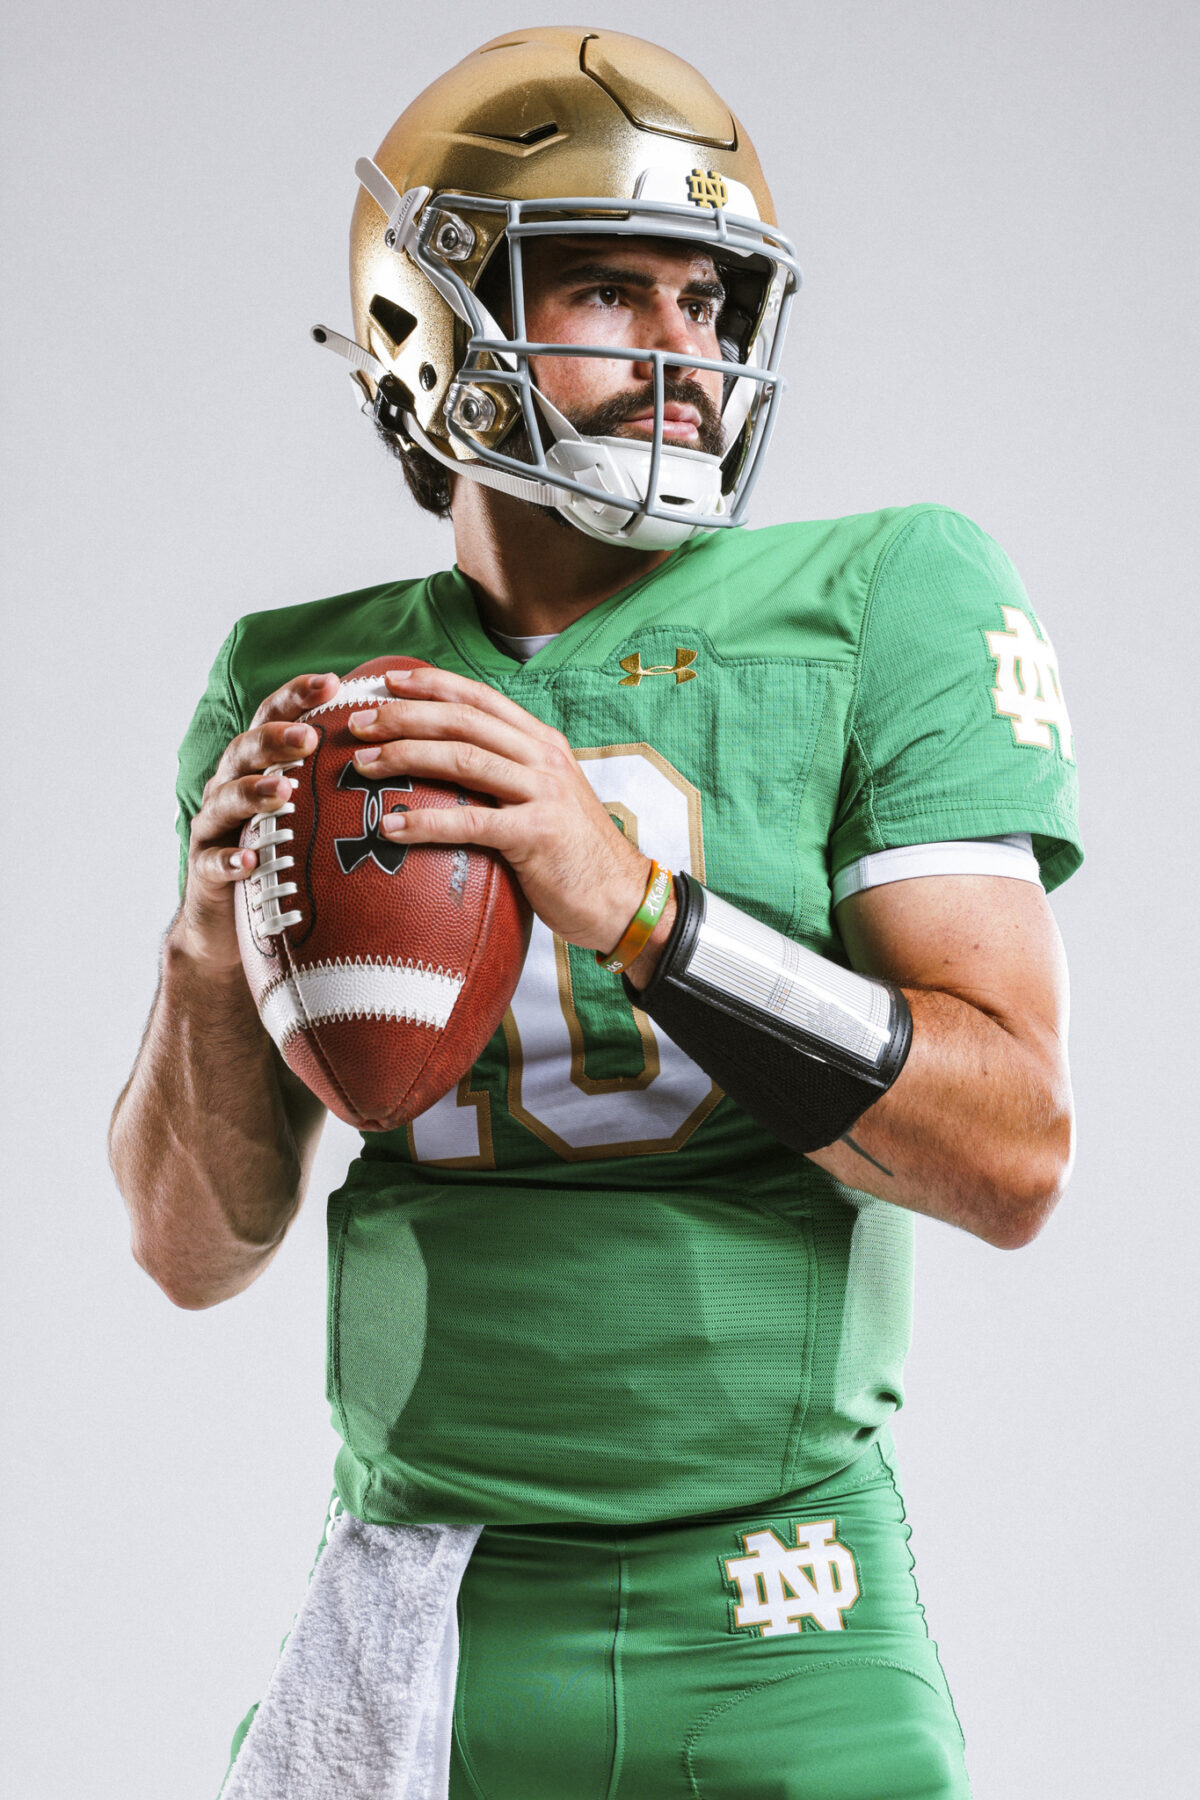 Social media reacts to Notre Dame unveiling green uniforms